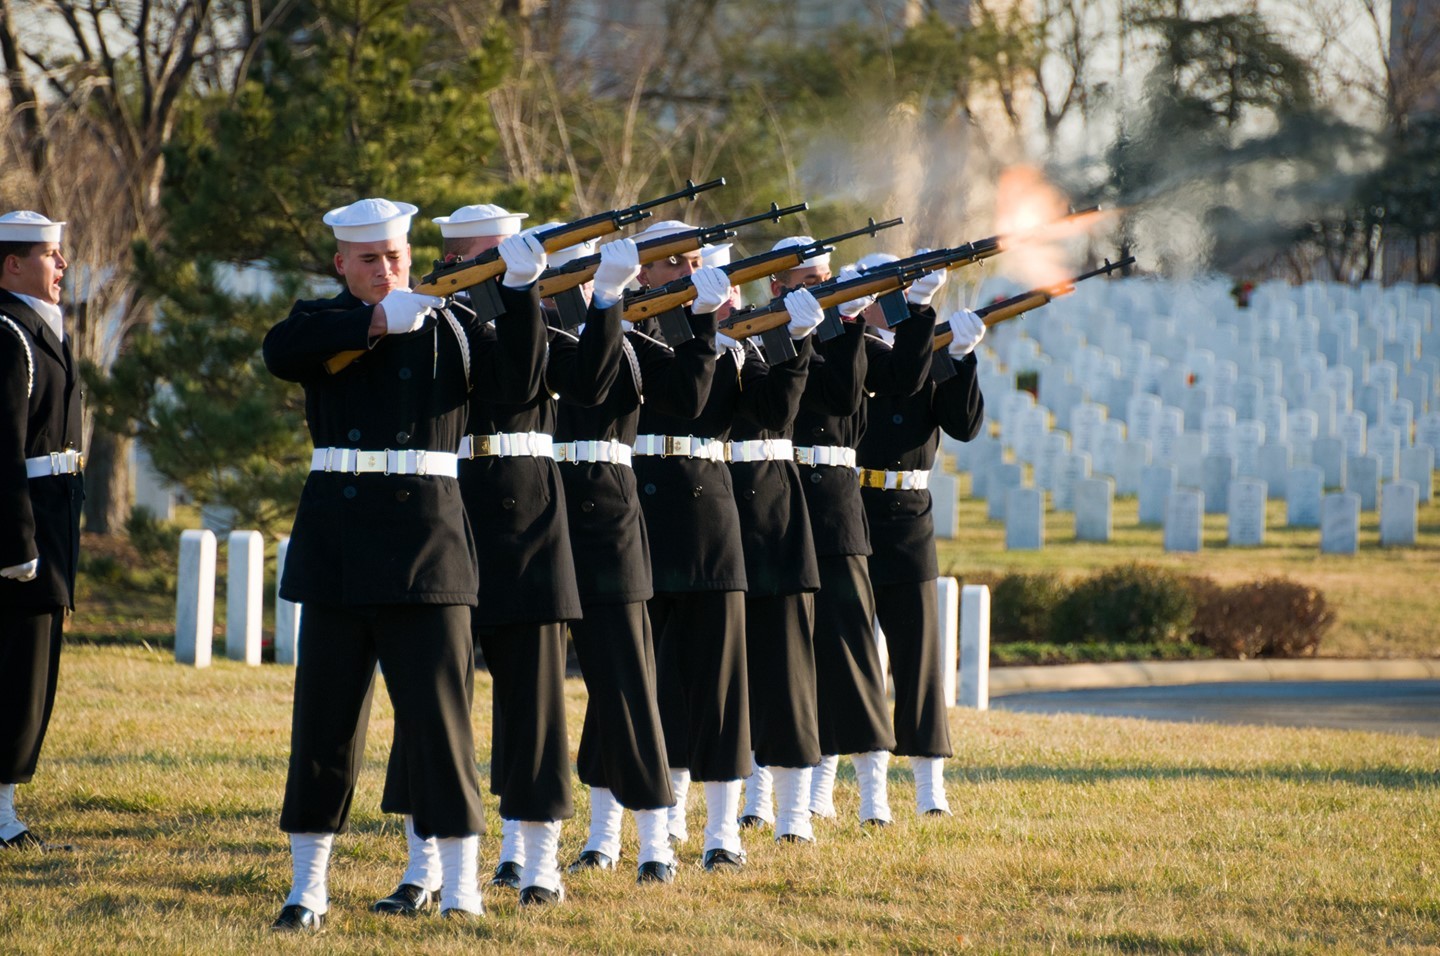 US Navy Rifle Platoon fires three volleys during a service at Arlington National Cemetery. 

Members of the Navy Ceremonial Guard participate in some of our nation’s most prestigious ceremonies, including Presidential inaugurations and arrival ceremonies for foreign officials.  In addition, the Navy Ceremonial Guard serves as the  funeral escort and conducts all services for Navy personnel buried in Arlington National Cemetery.

Tasking for ceremonies comes from the President of the United States, the Secretaries of Defense and the Navy, the Chairman of the Joint Chiefs of Staff, the Chief of Naval Operations, and the Commandant, Naval District Washington.  Navy Ceremonial Guard Sailors participate in numerous other military ceremonies at local commands.  Some elements of the command, such as the Drill Team and Color Guard, have represented the Navy in public events across the nation and around the world.